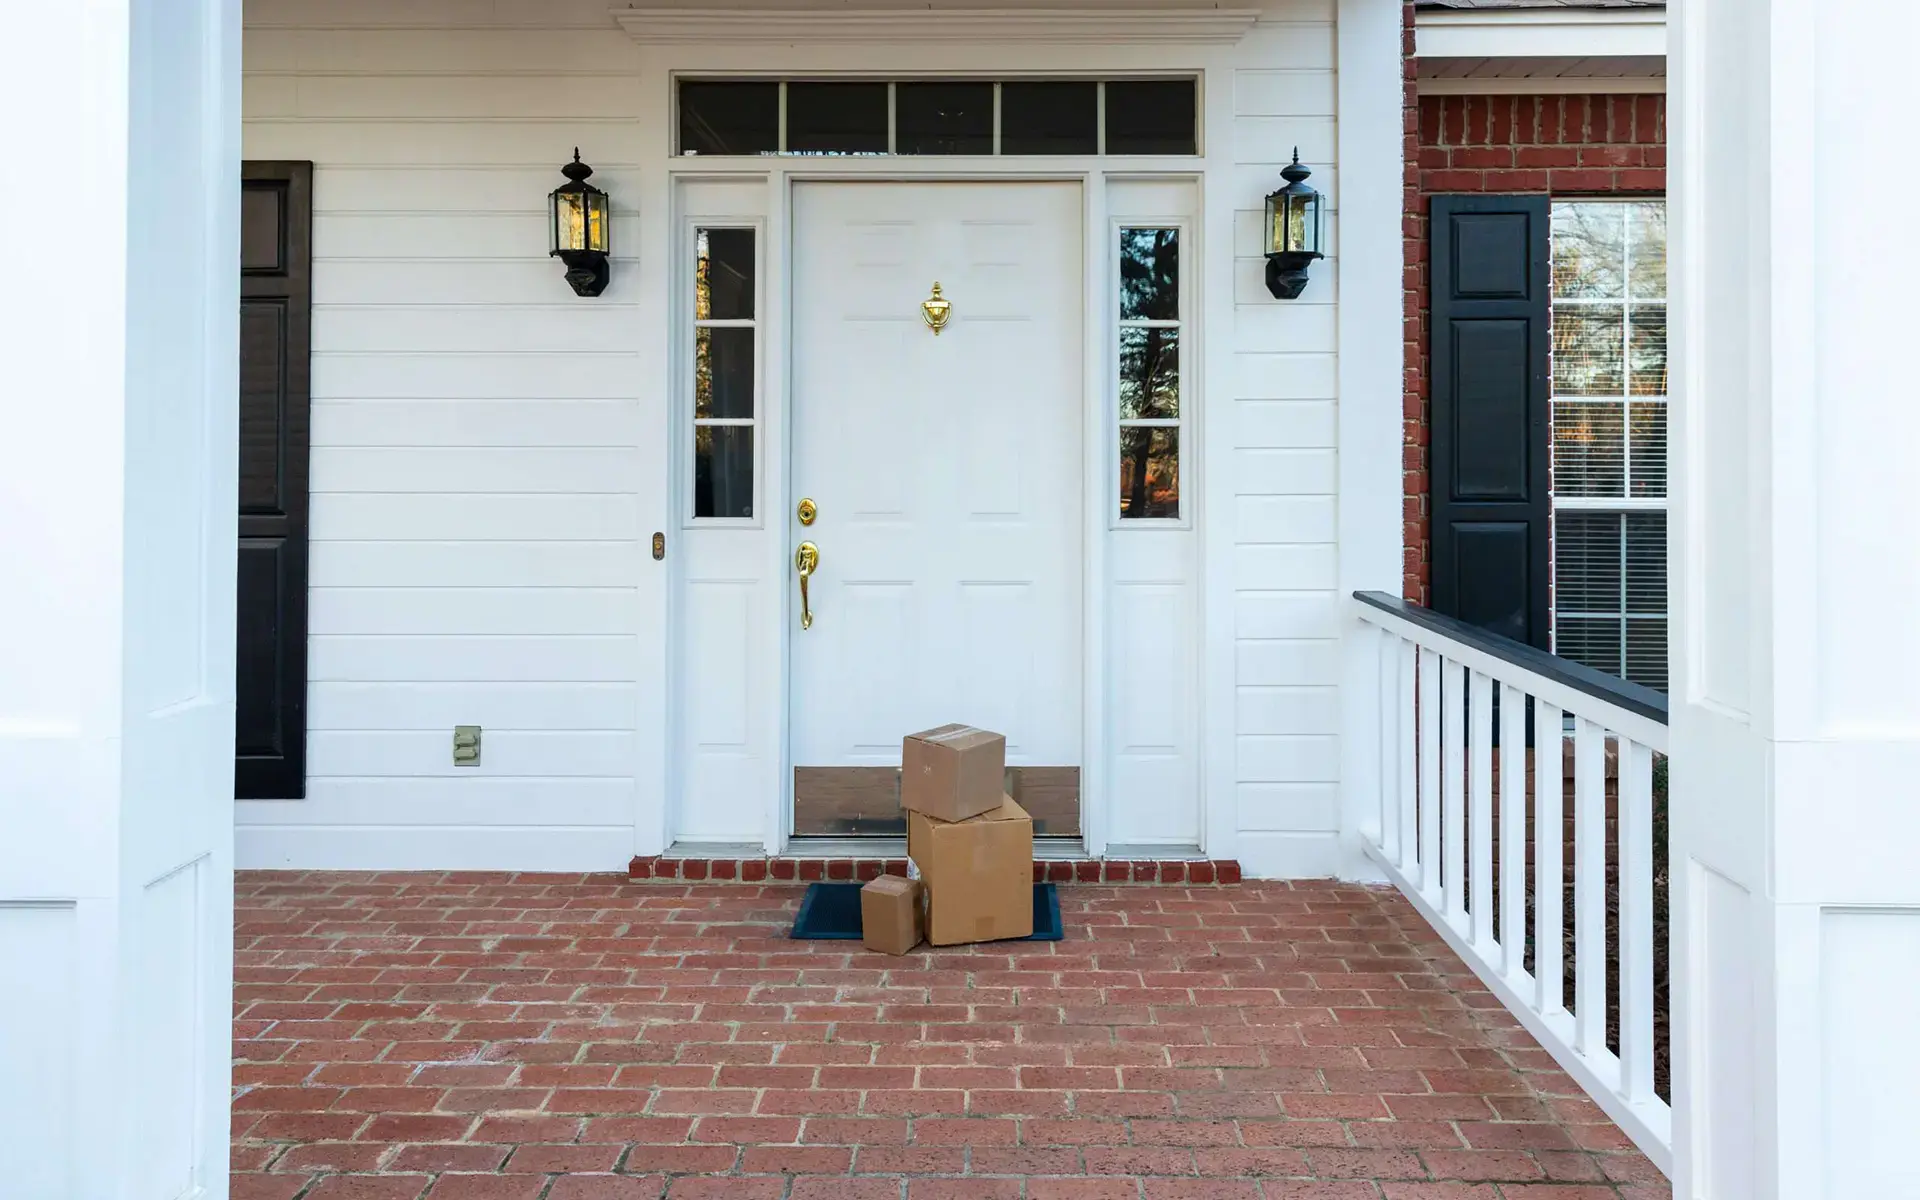 mail and packages wait on a front step to get picked up and brought inside